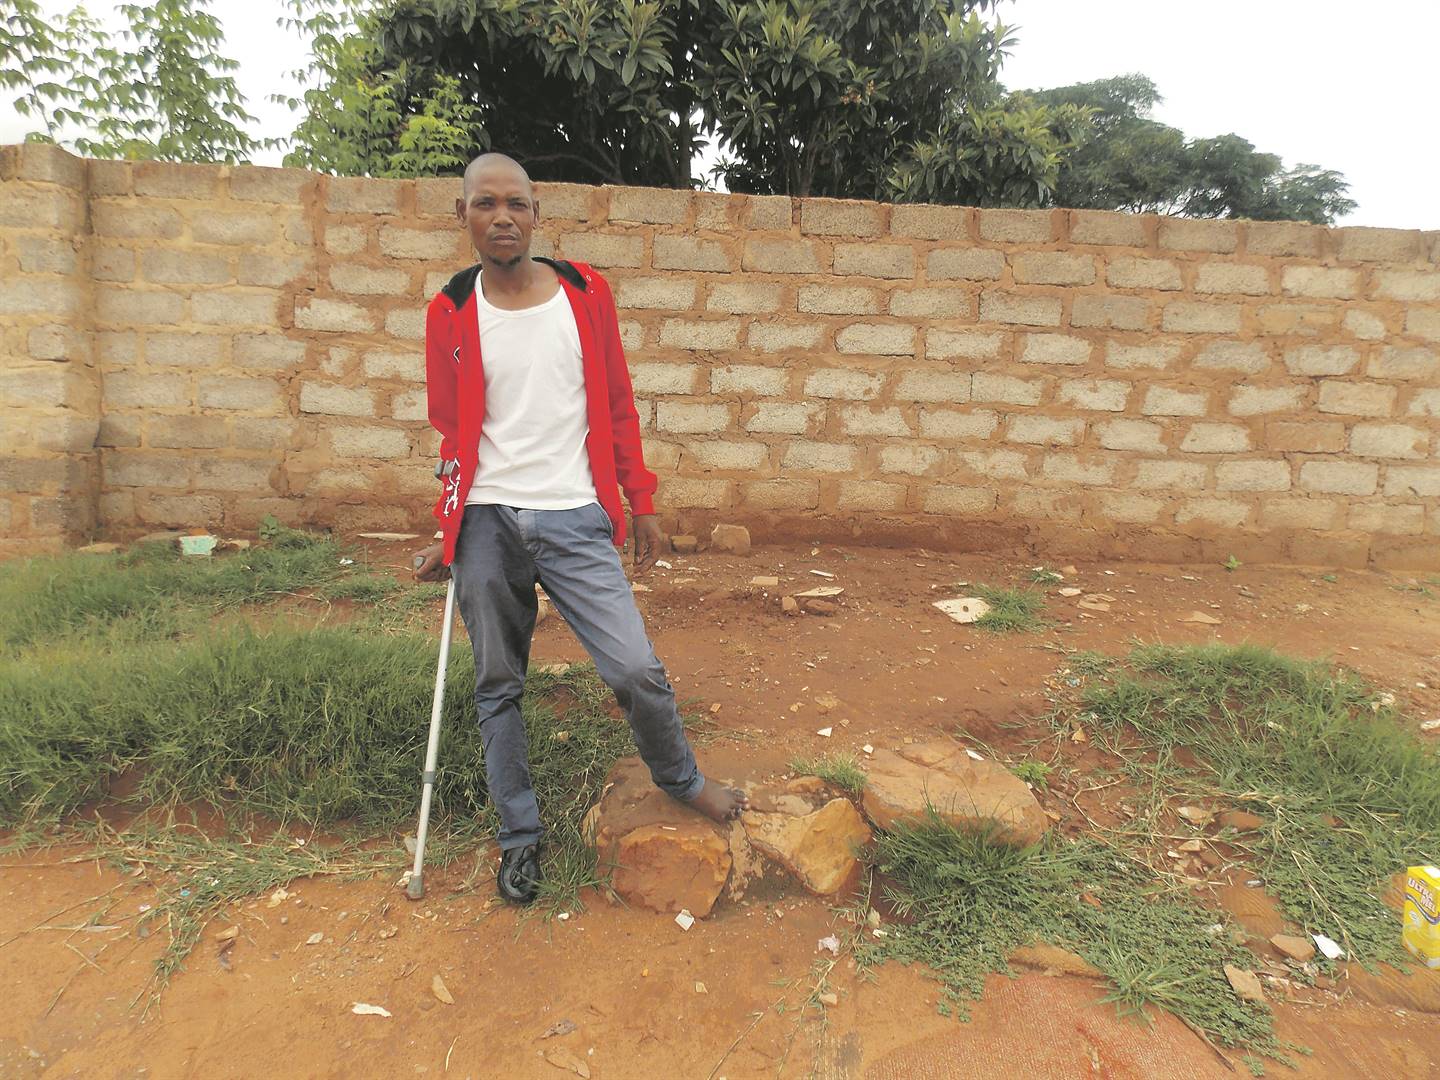 Siphiwe Kgasago is using a crutch to walk after his toes began to hurt.          Photo by Aaron Dube